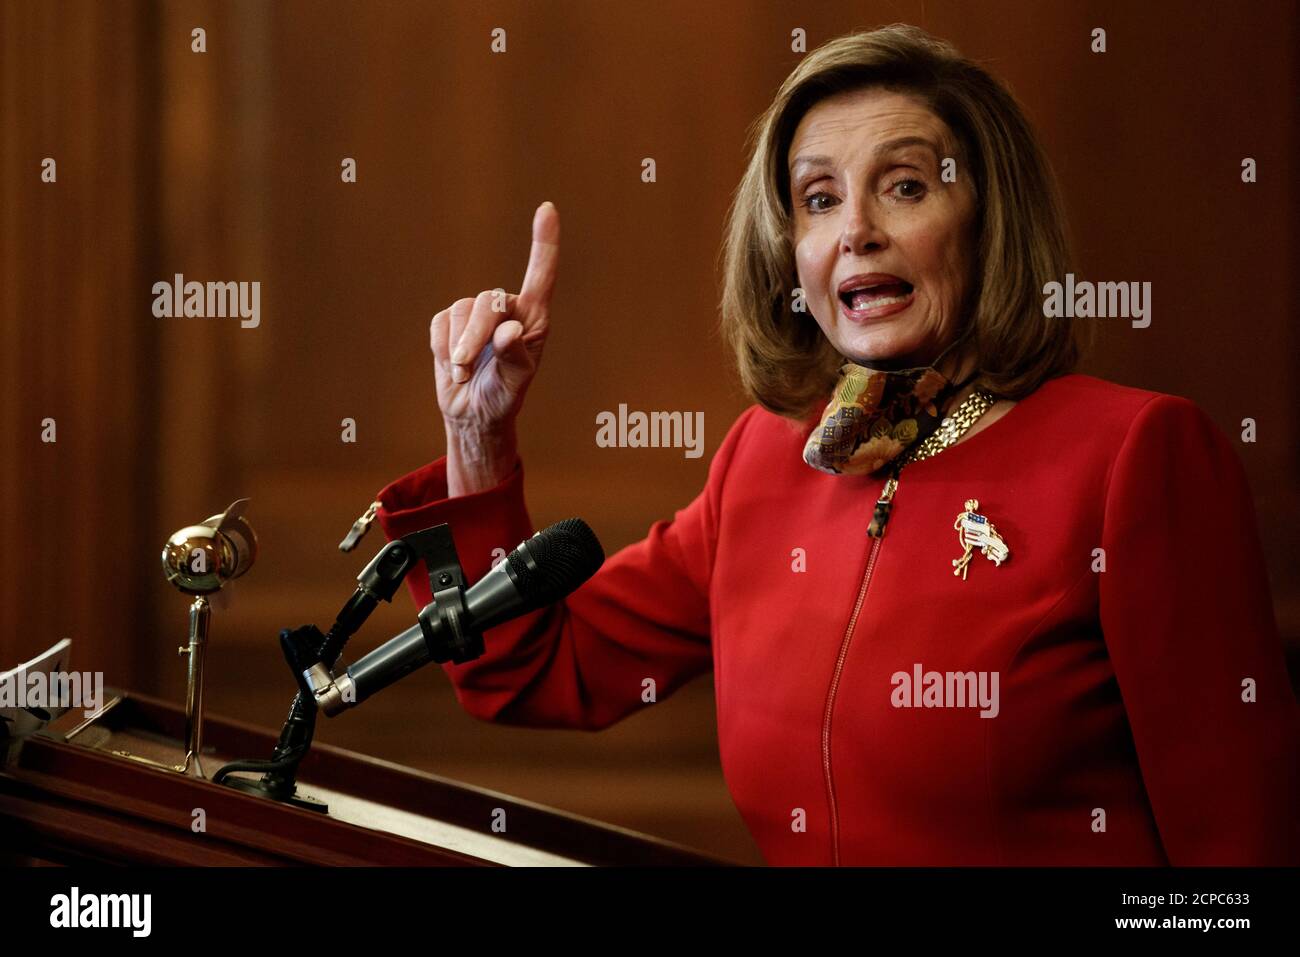 Beijing, USA. 17th Sep, 2020. U.S. House Speaker Nancy Pelosi speaks during a press conference on Capitol Hill in Washington, DC, the United States, on Sept. 17, 2020. The U.S. House on Thursday passed a resolution condemning 'all forms of anti-Asian sentiment as related to COVID-19.' Credit: Ting Shen/Xinhua/Alamy Live News Stock Photo